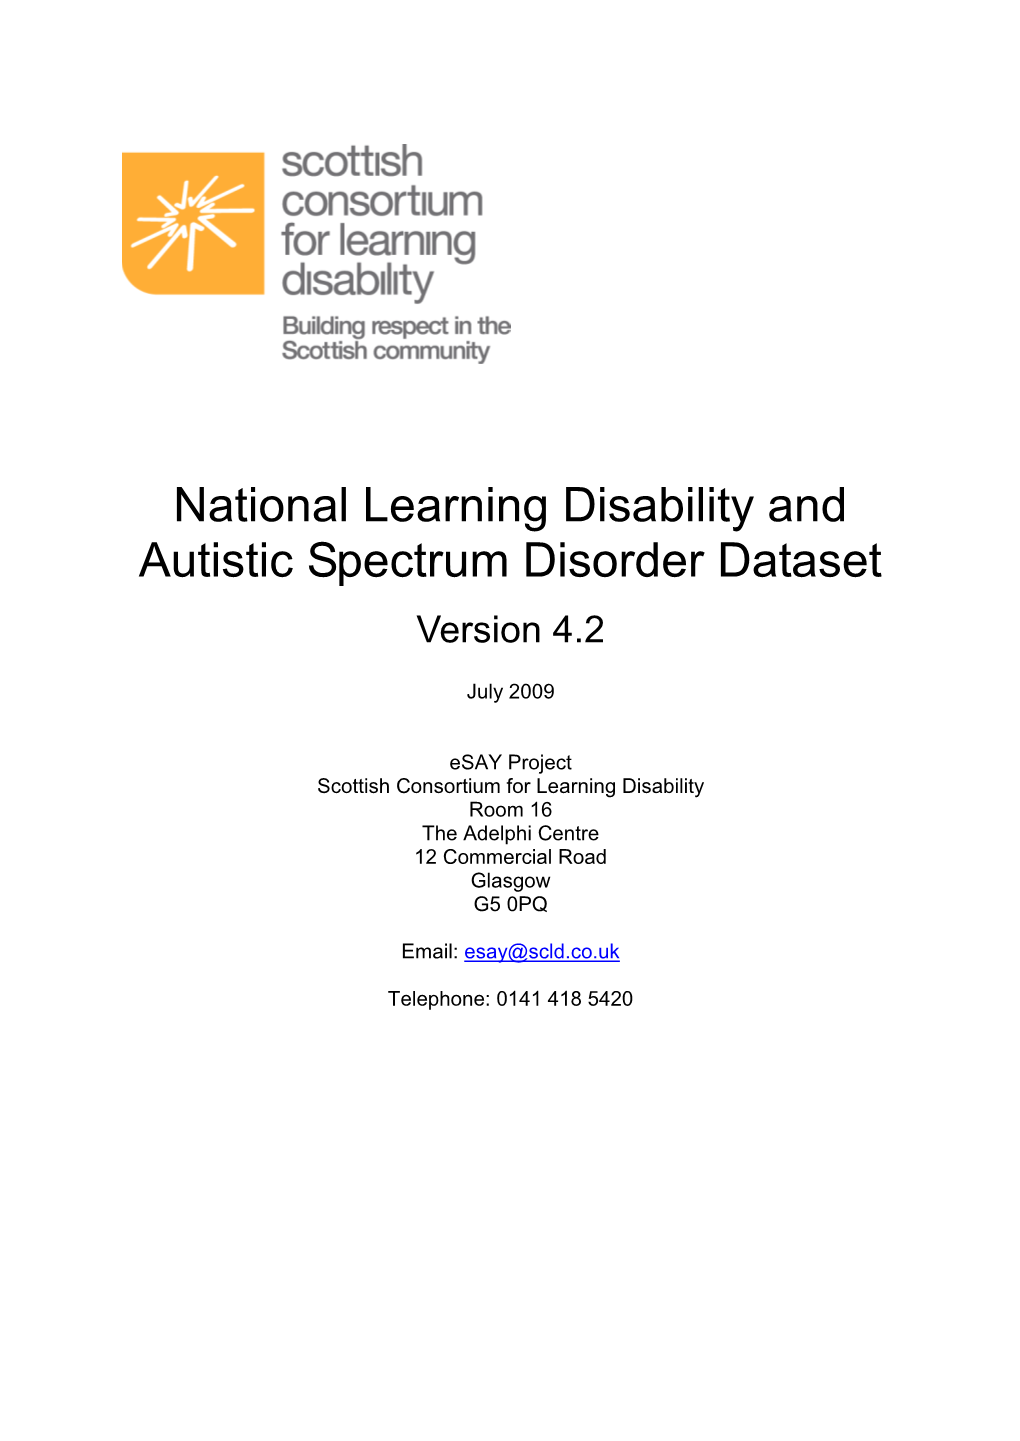 National Learning Disability and Autistic Spectrum Disorder Dataset V4